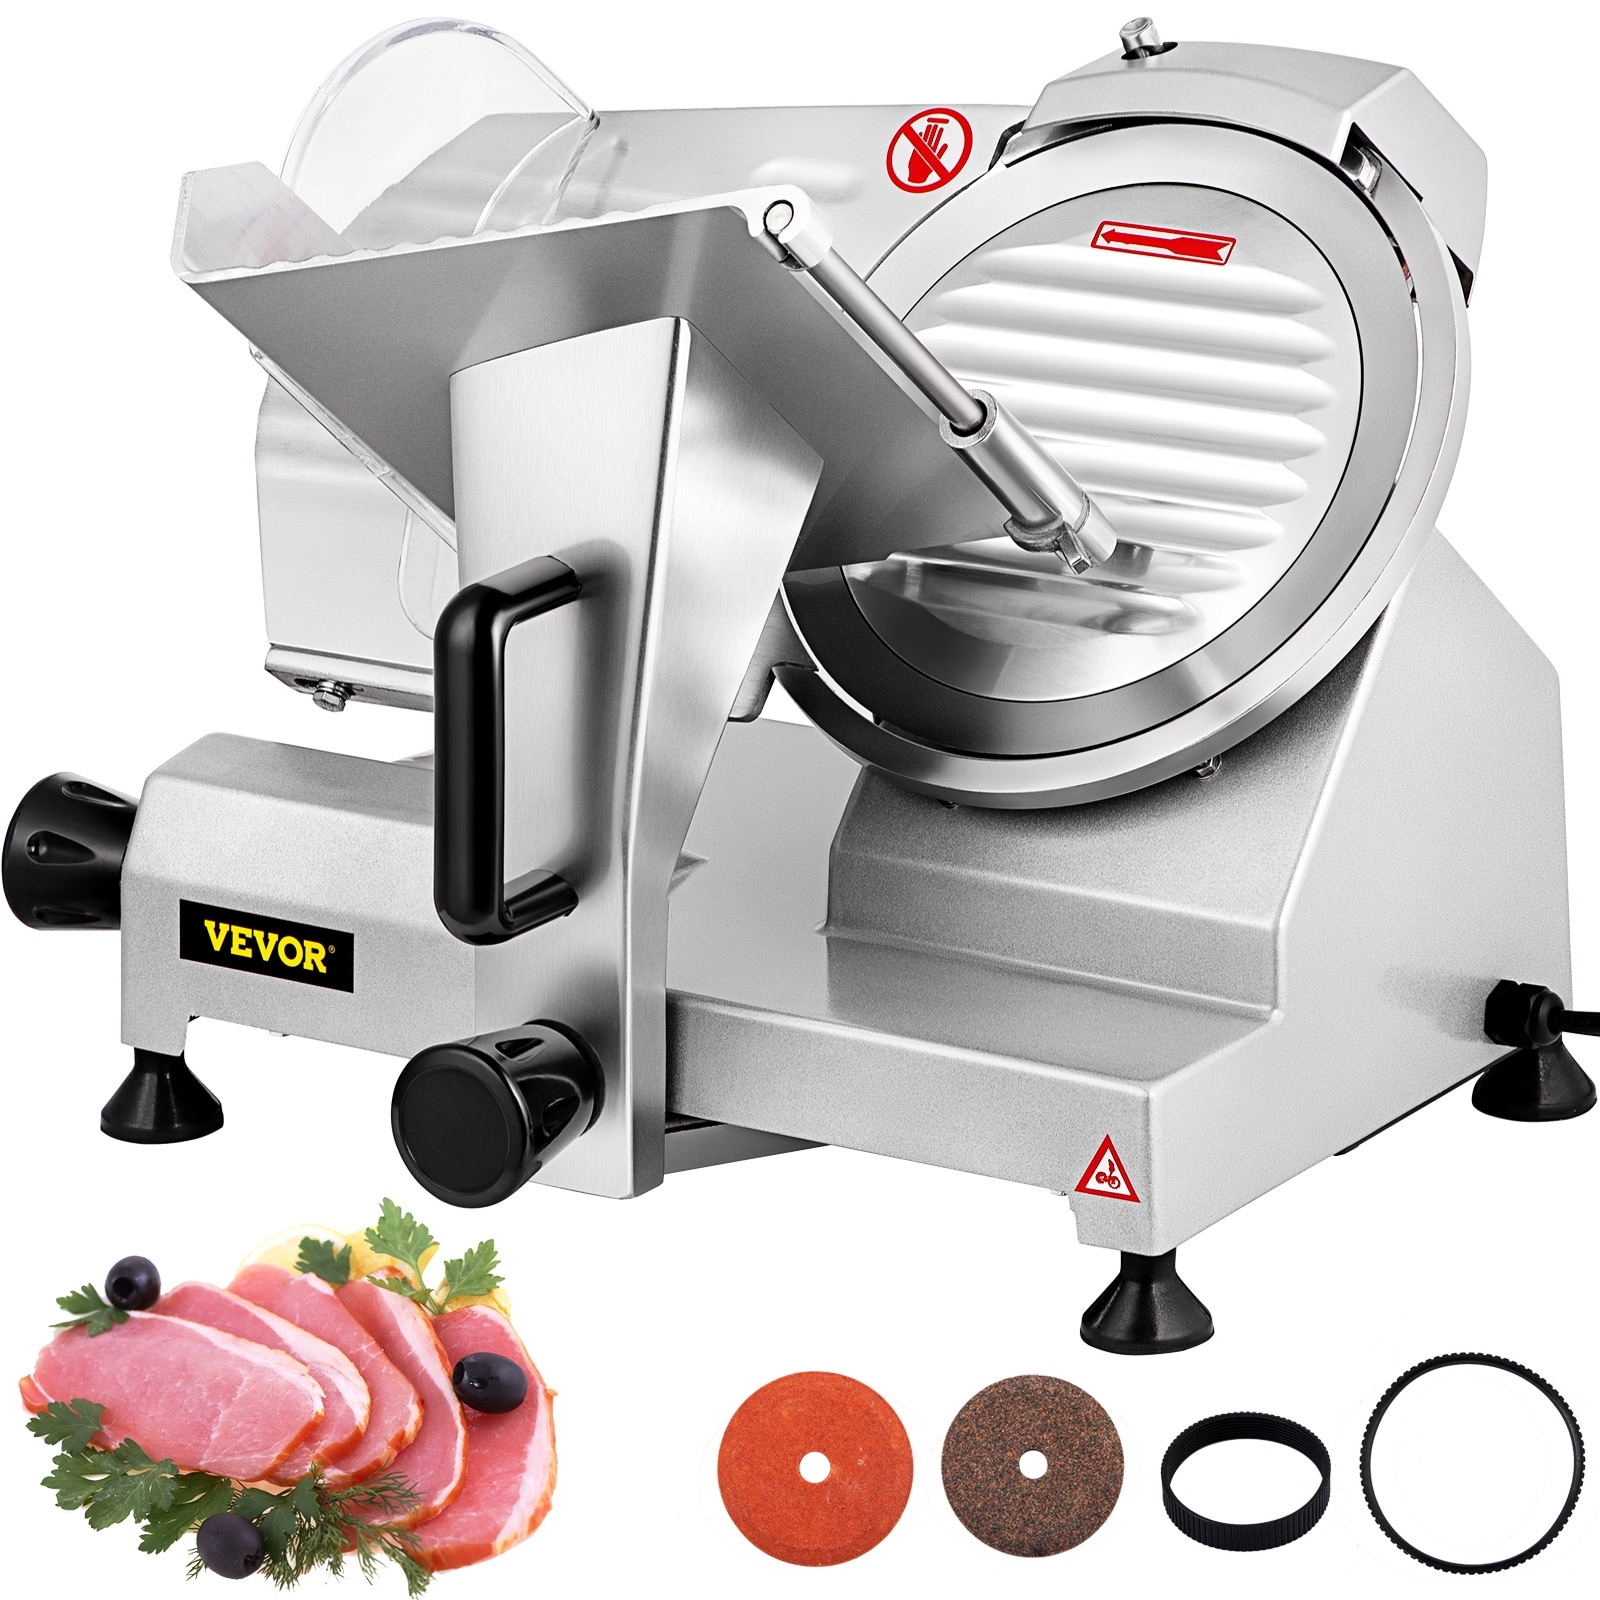 https://ak1.ostkcdn.com/images/products/is/images/direct/4c99b58d1612bd8260a48eb4cd0a9dad4fd7a392/VEVOR-Commercial-Meat-Slicer-Electric-Deli-Food-Slicer-1200RPM-Meat-Slicer-with-8%27%27-Chromium-plated-Steel-Blade.jpg